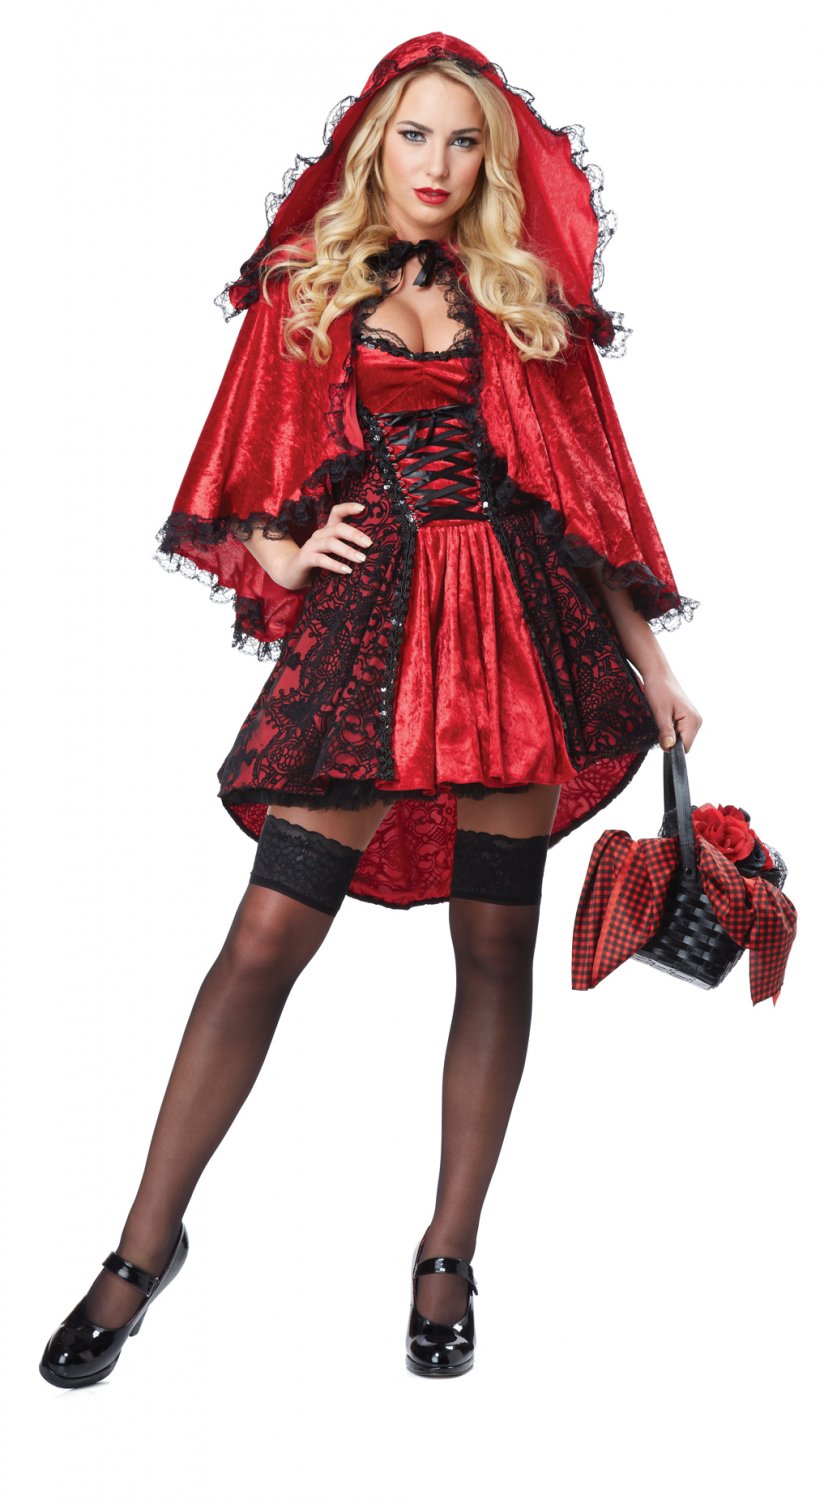 Size 2x Large 01300 Sexy Dark Gothic Deluxe Red Riding Hood Adult Costume 1510